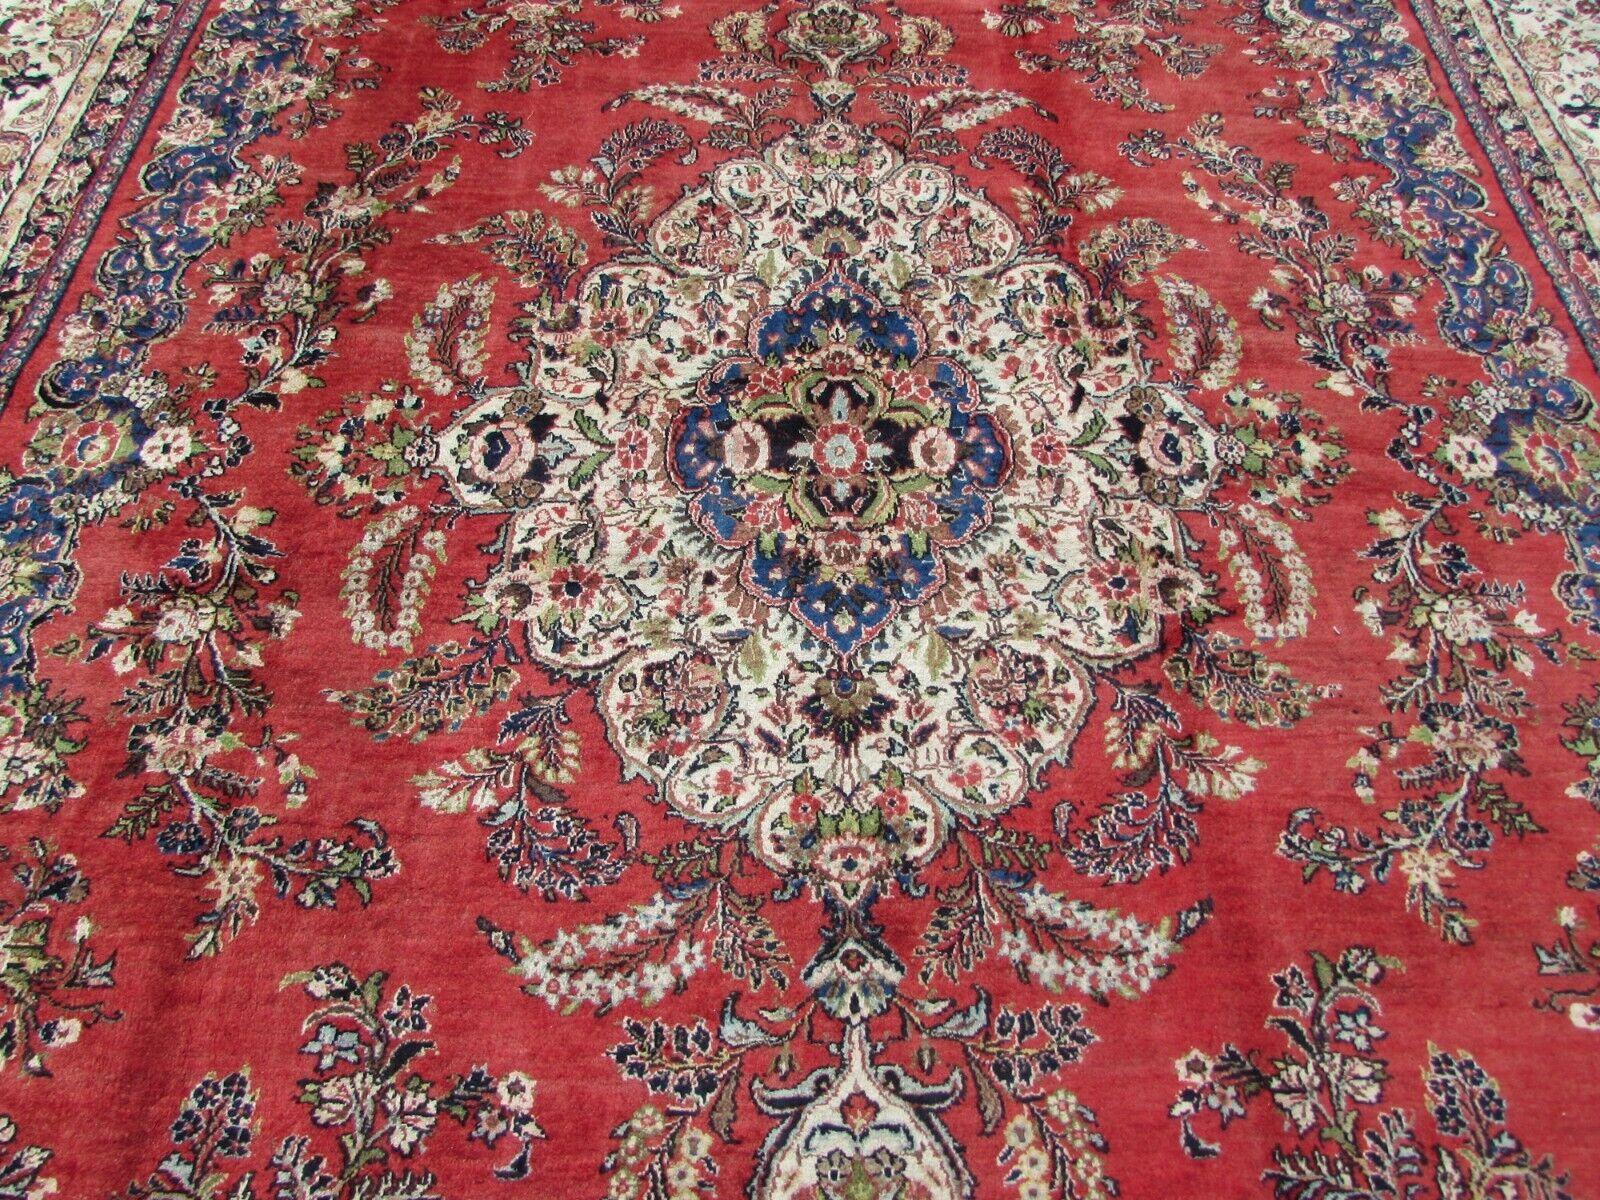 Handmade Vintage Persian Style Sarouk Oversize Rug 10.7' x 16.4', 1970s - 1Q72 For Sale 4